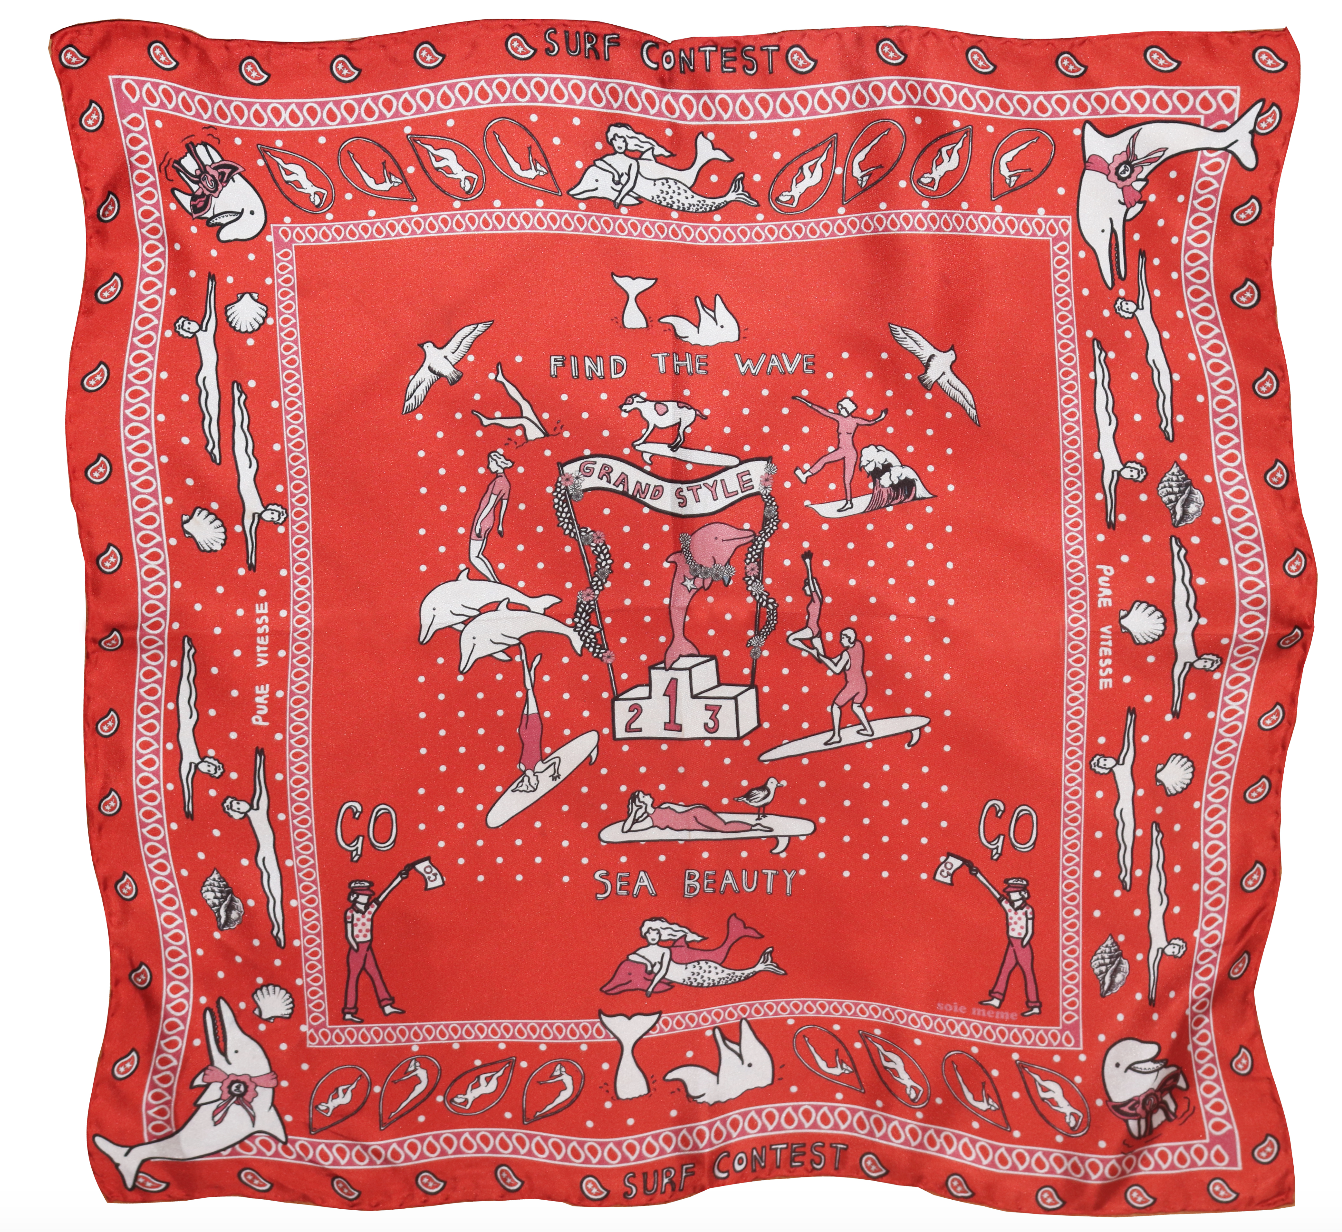 Sea Beauty Scarf in Red